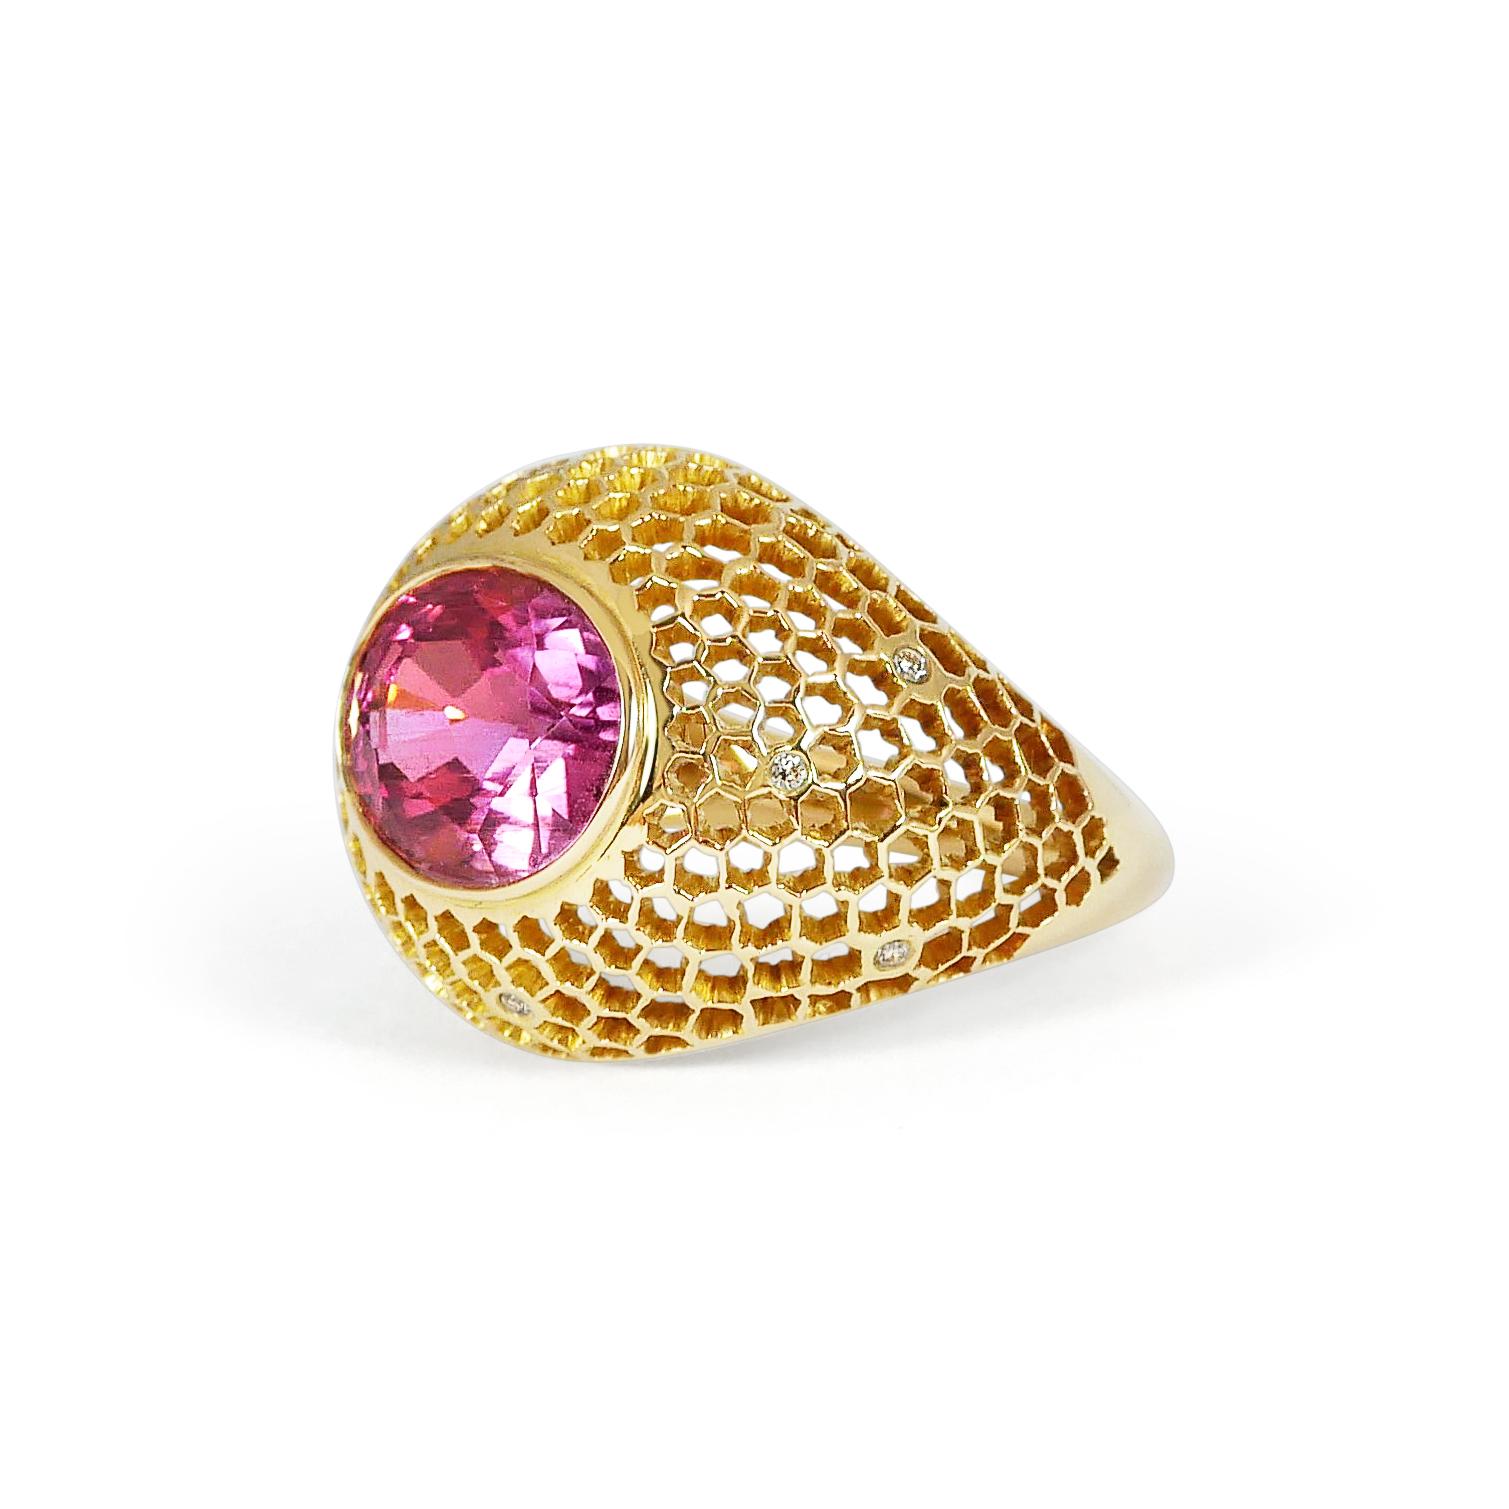 A beautiful 5,55cts Pink Tourmaline is nested on top of our preciously hand pierced gold and diamond 18k lace. This unique technique, inspired by our designer's childhood memories of lace makers of Normandie and the intricate architecture of Indian